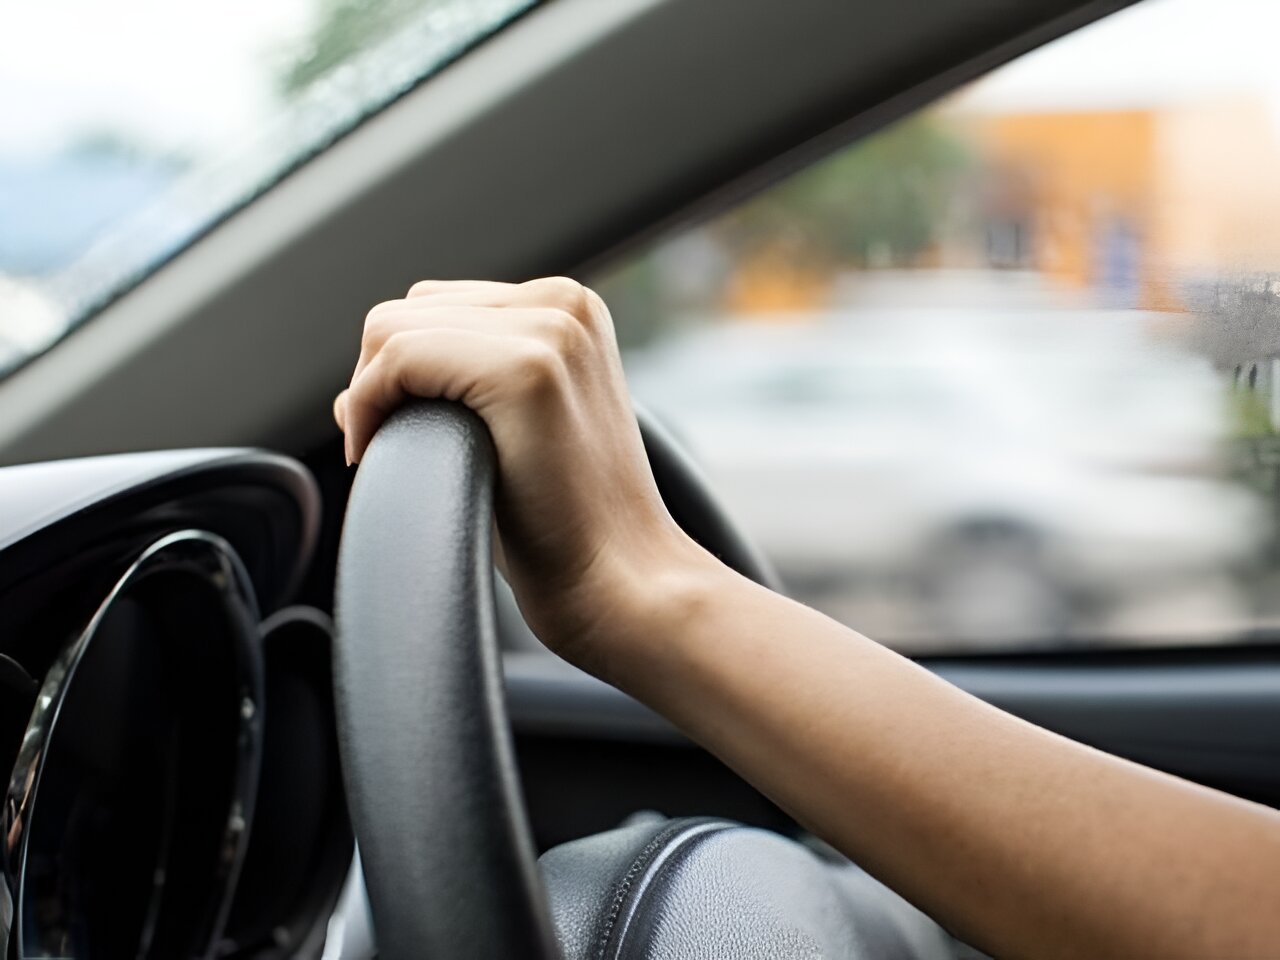 Anxious driver? There are methods to ease your stress